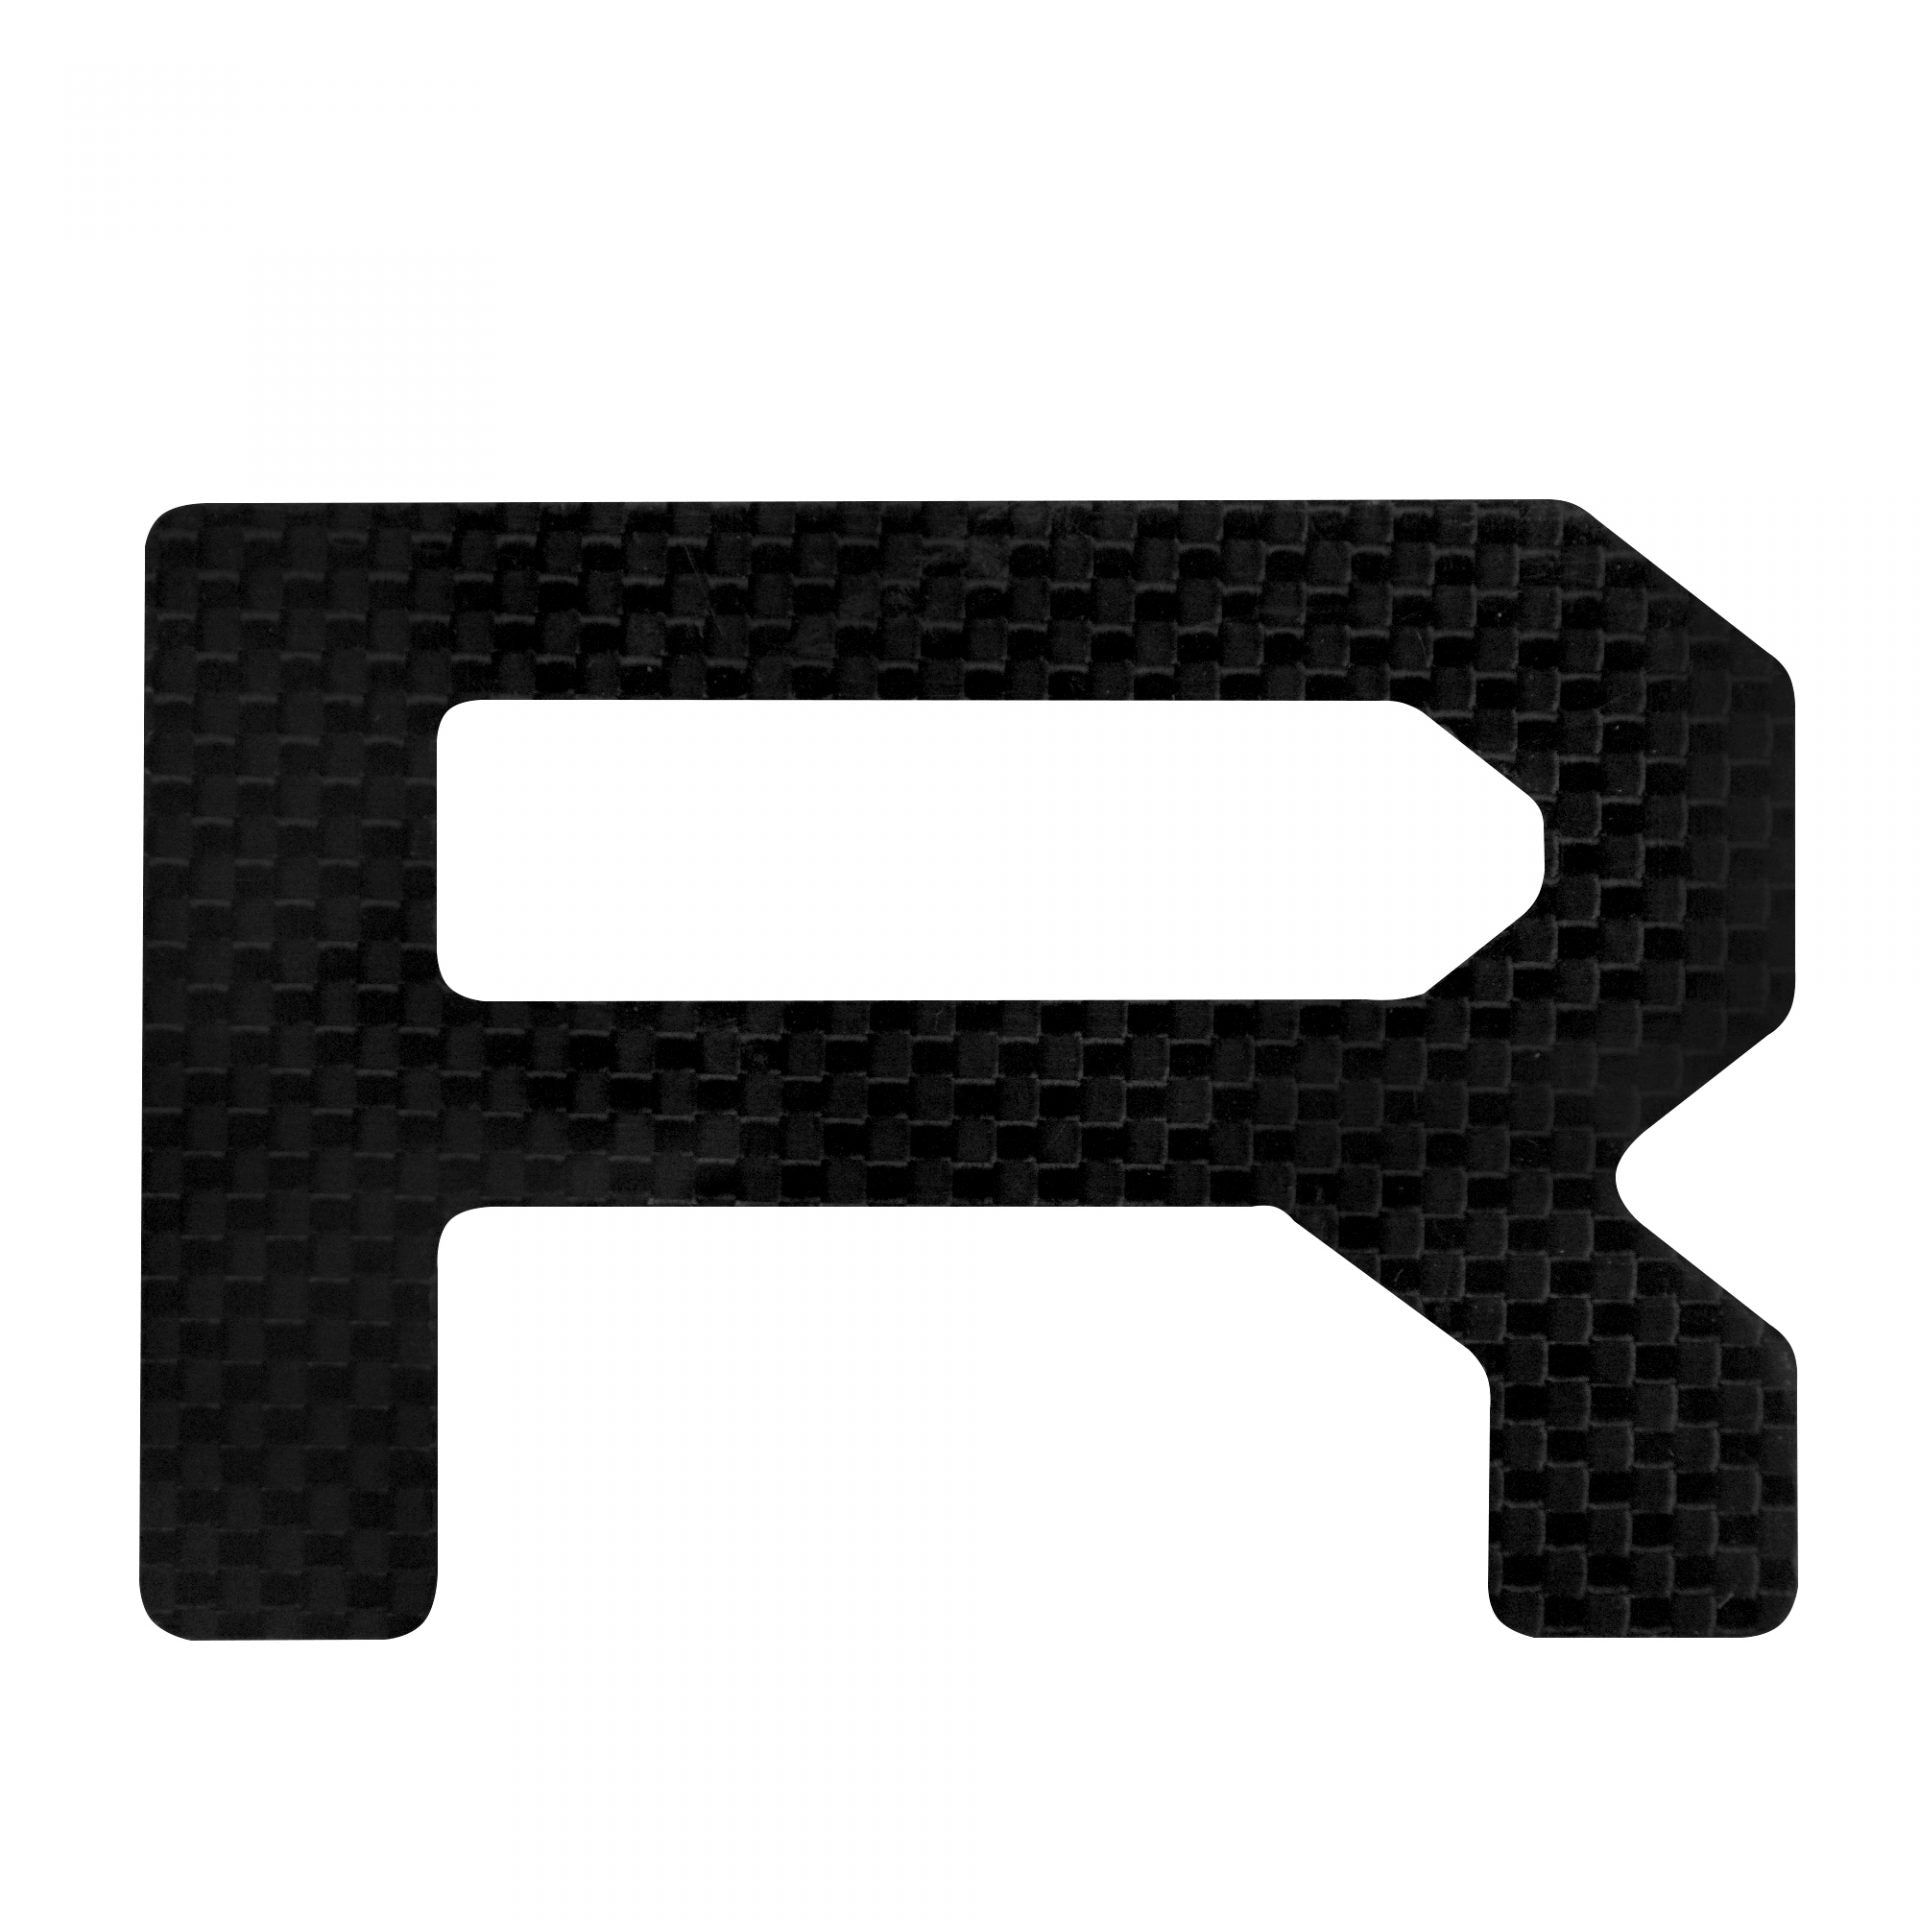 Toyota Tundra 14-19 Raised Logo Acrylic Emblem Insert 1-Piece for Tailgate Only - CARBON FIBER